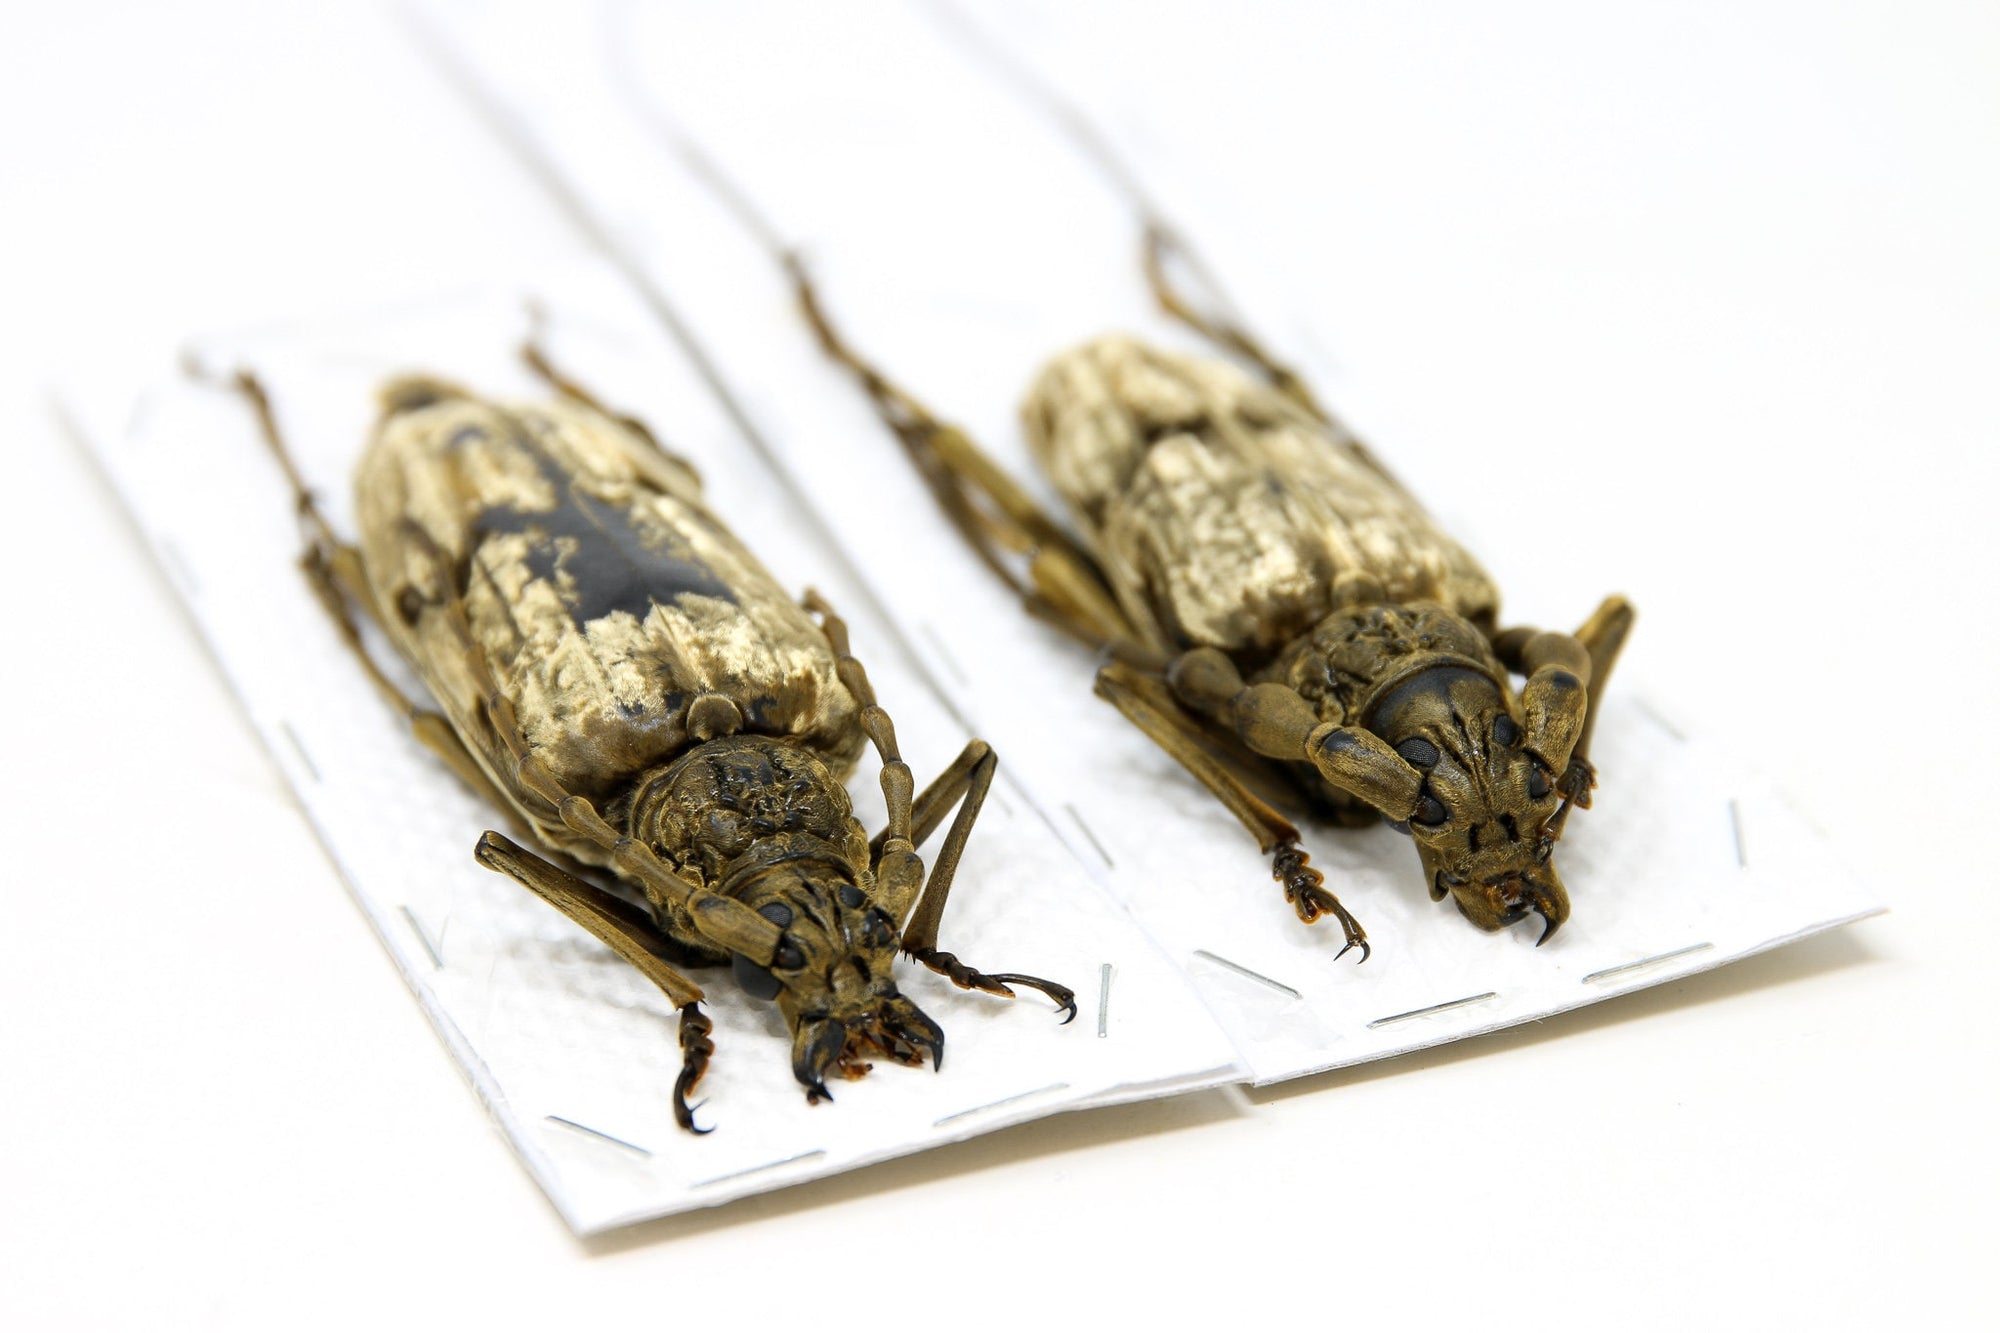 ONE PAIR x Giant Velvet Longhorned Beetles (Neocerambyx gigas) Thailand Specimens A1 Quality Real Insect Entomology